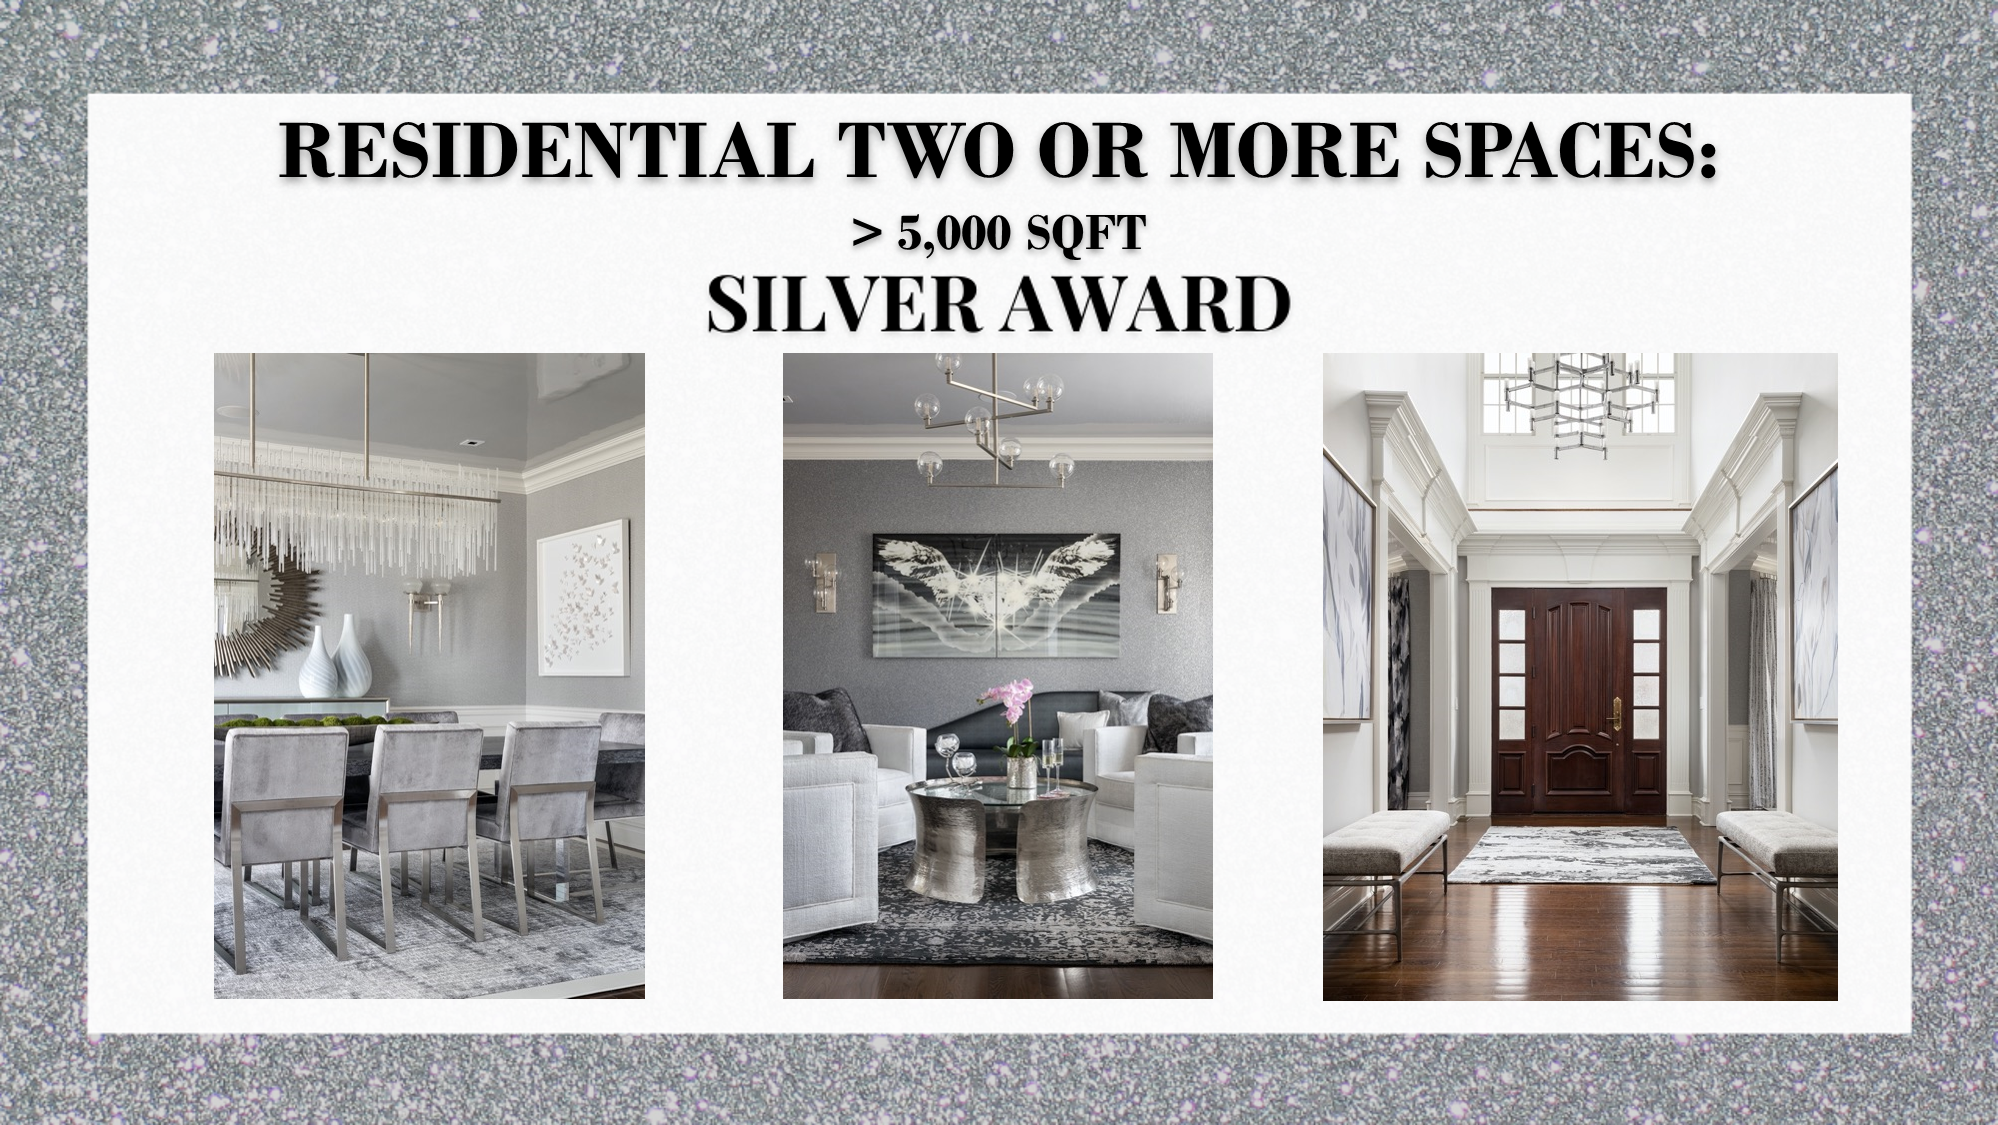 Silver Award Residential Two or More Spaces > 5,000 Square Foot